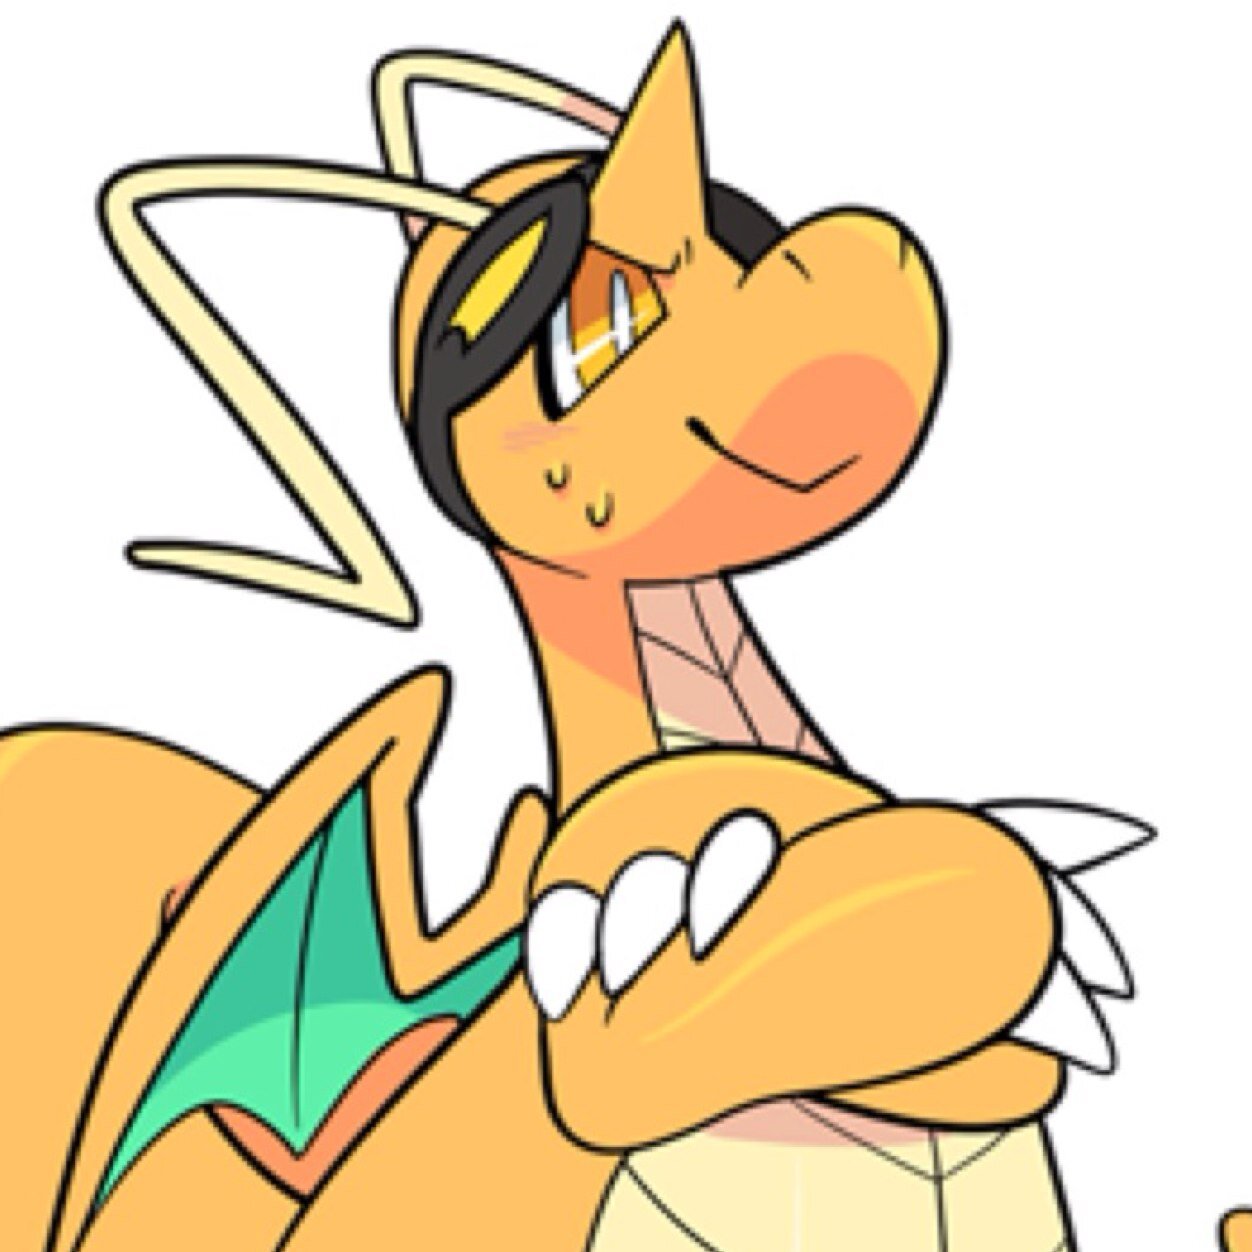 This dragonite lives in solitude,preferably keeping it that way. he is kind once known better. Has no mate. he is known well for his Bright Yellow eyes.